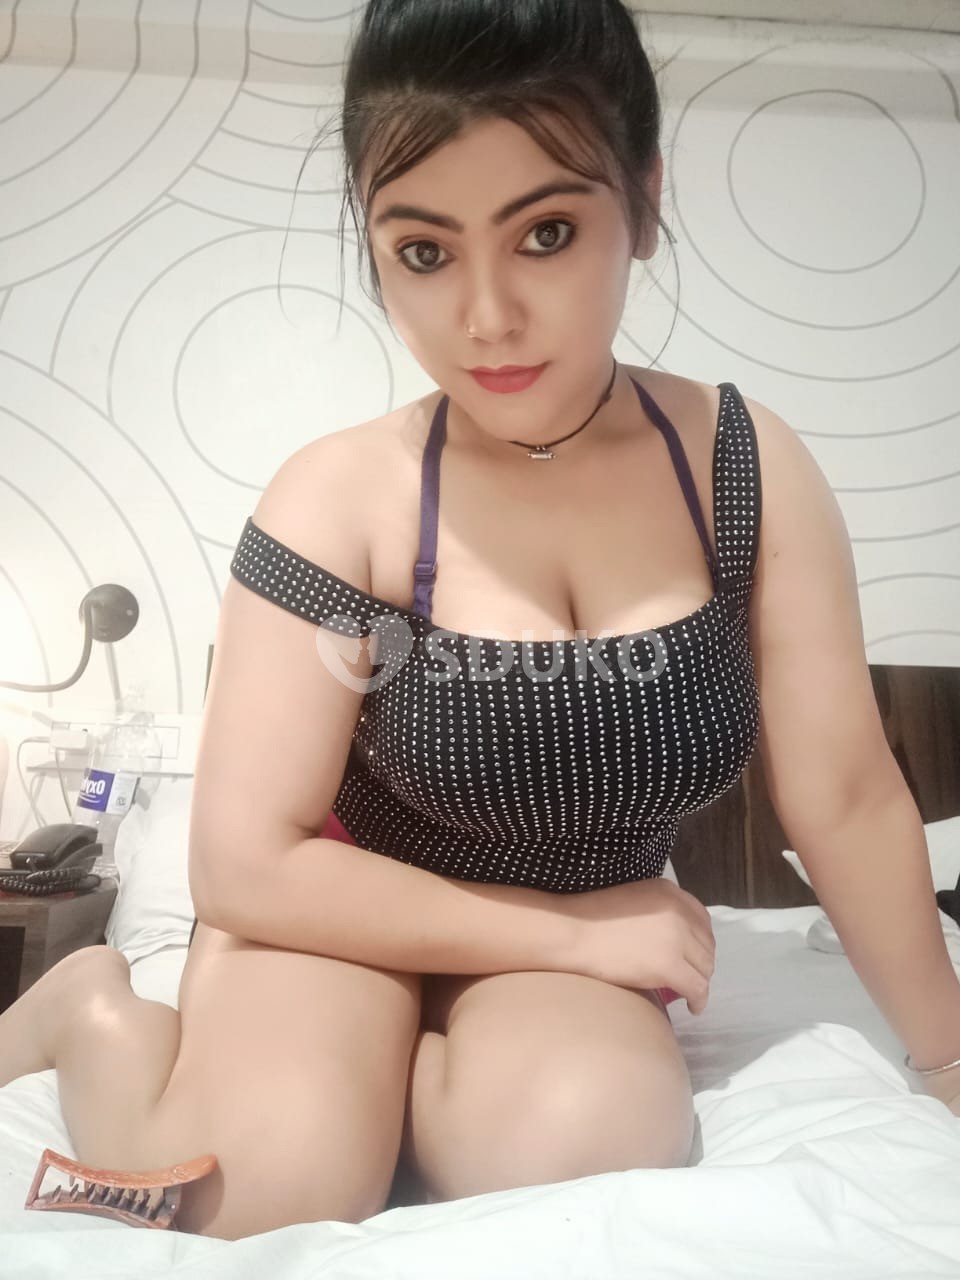 NILAM Pandey LOW PRICE🔸✅ SERVICE AVAILABLE 100% SAFE AND SECURE UNLIMITED ENJOY HOT COLLEGE GIRL HOUSEWIFE AUNTIE